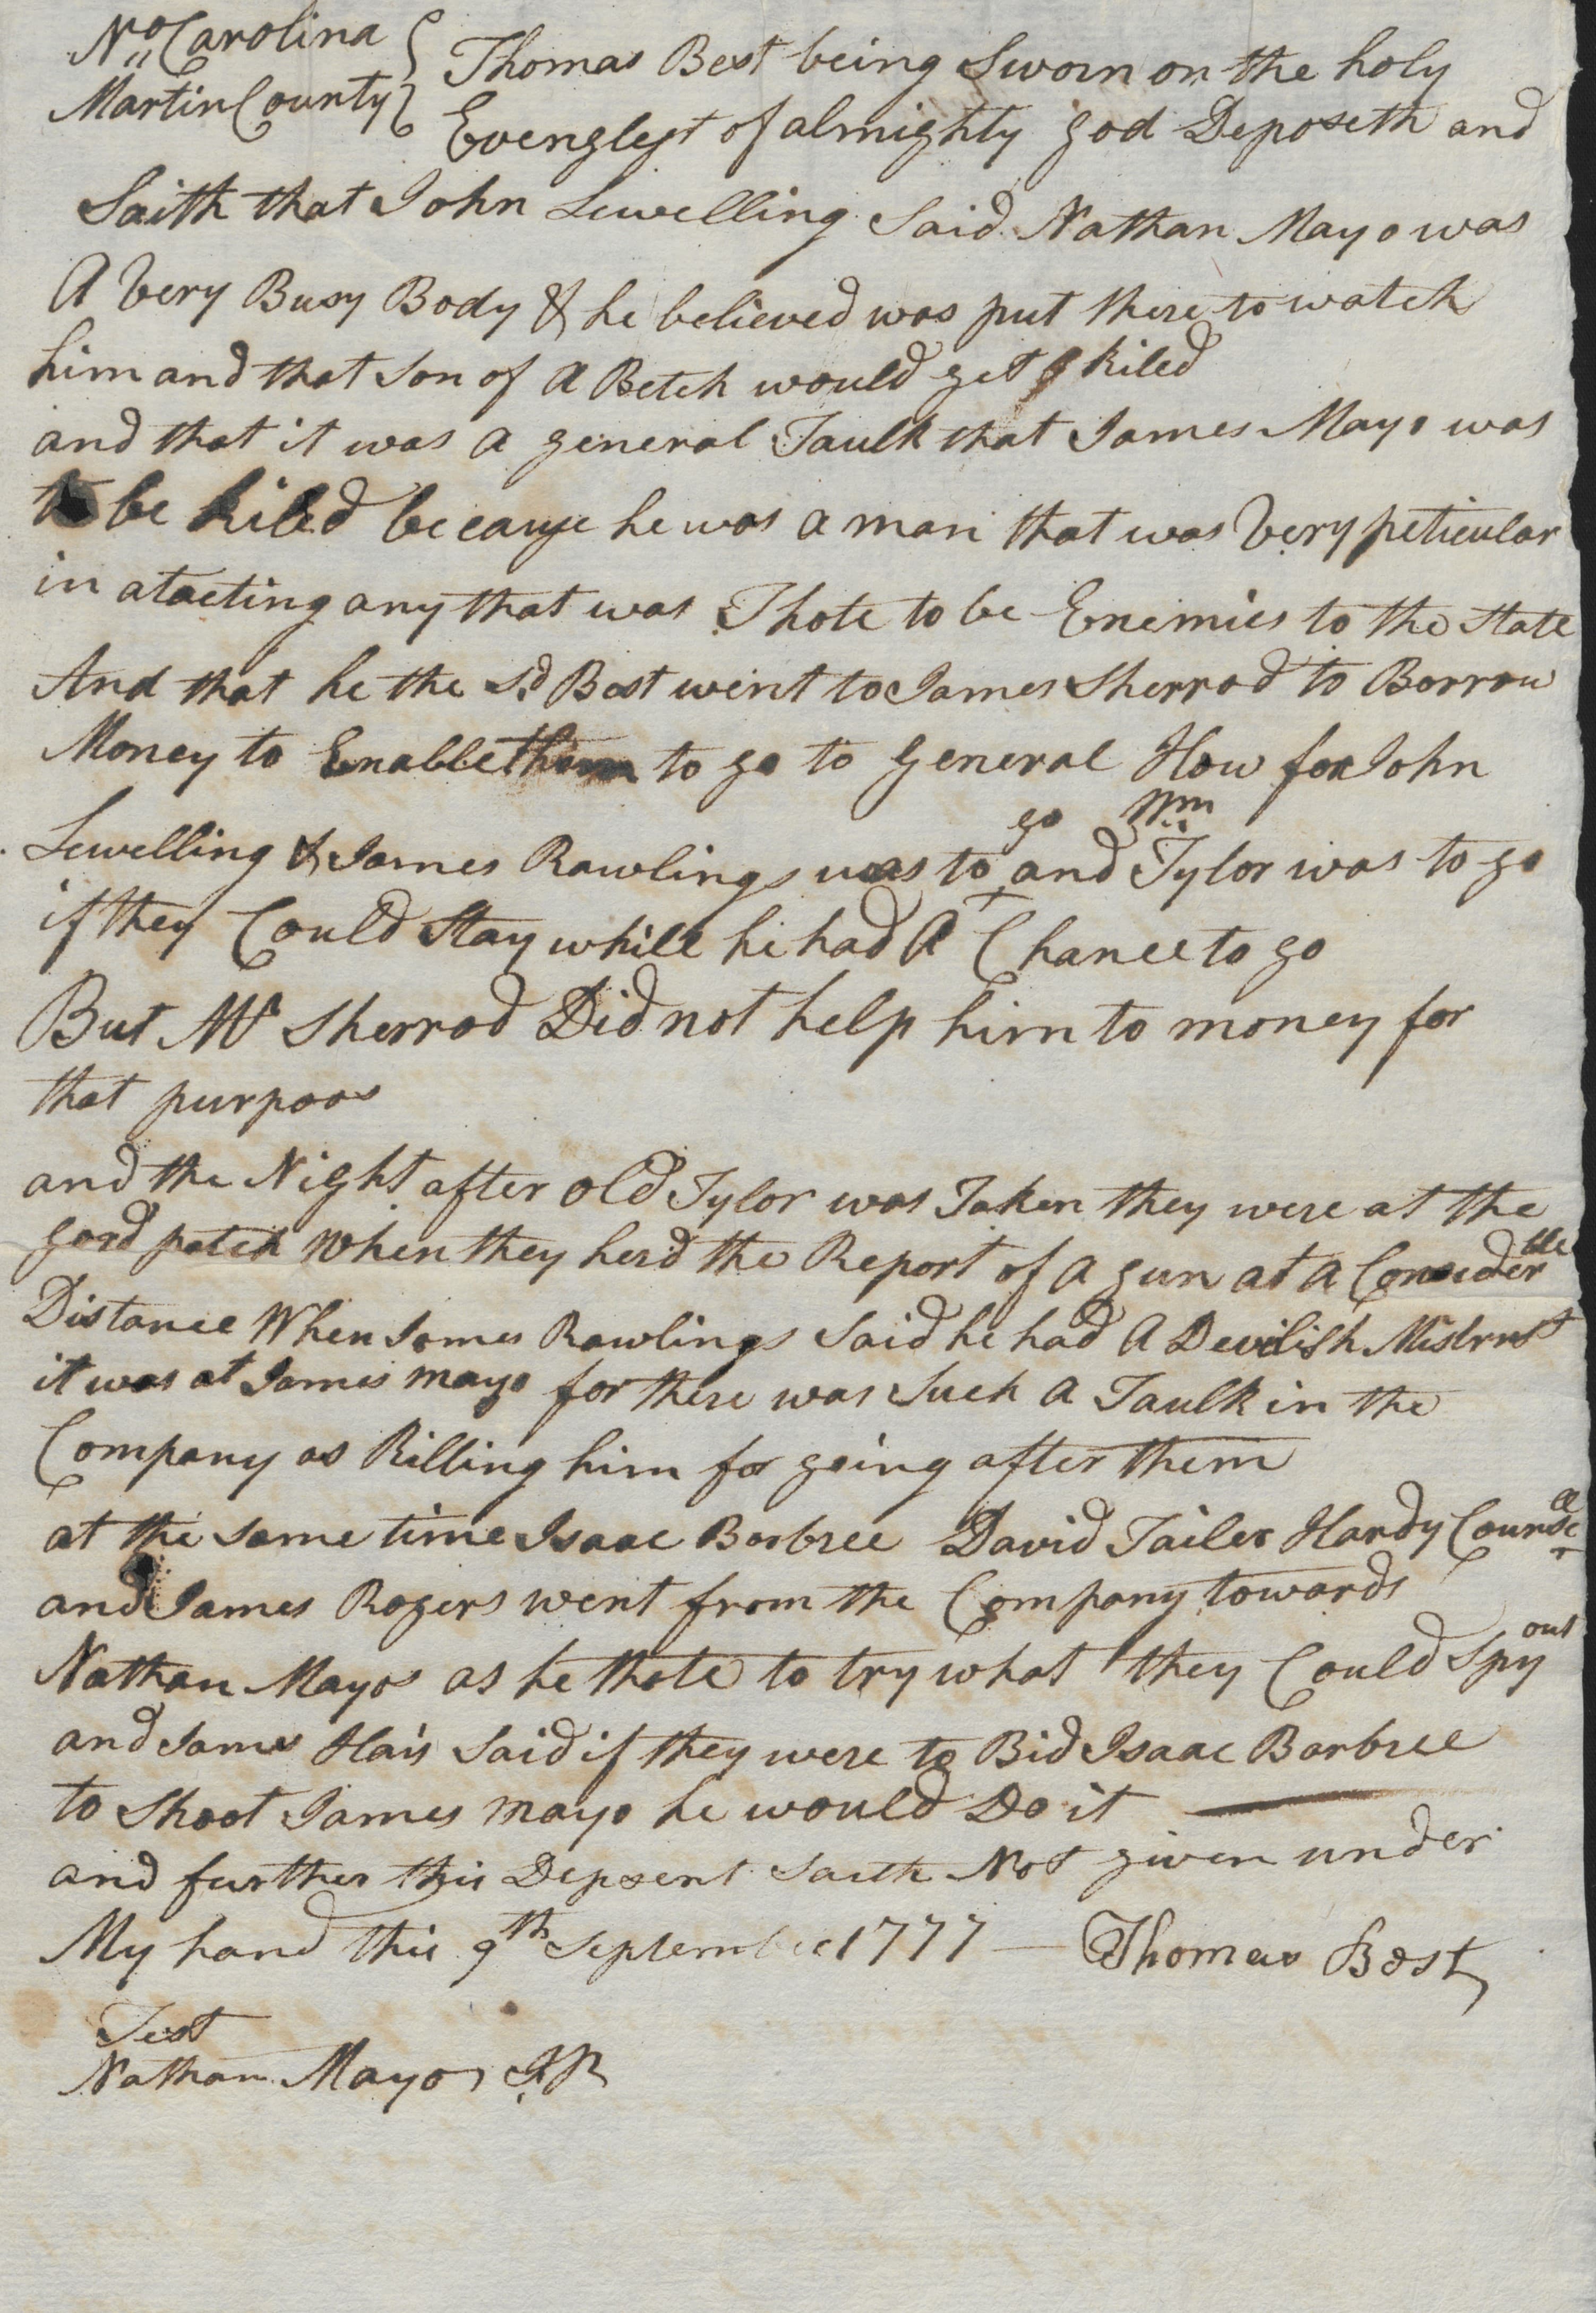 Deposition of Thomas Best, 9 September 1777, page 1